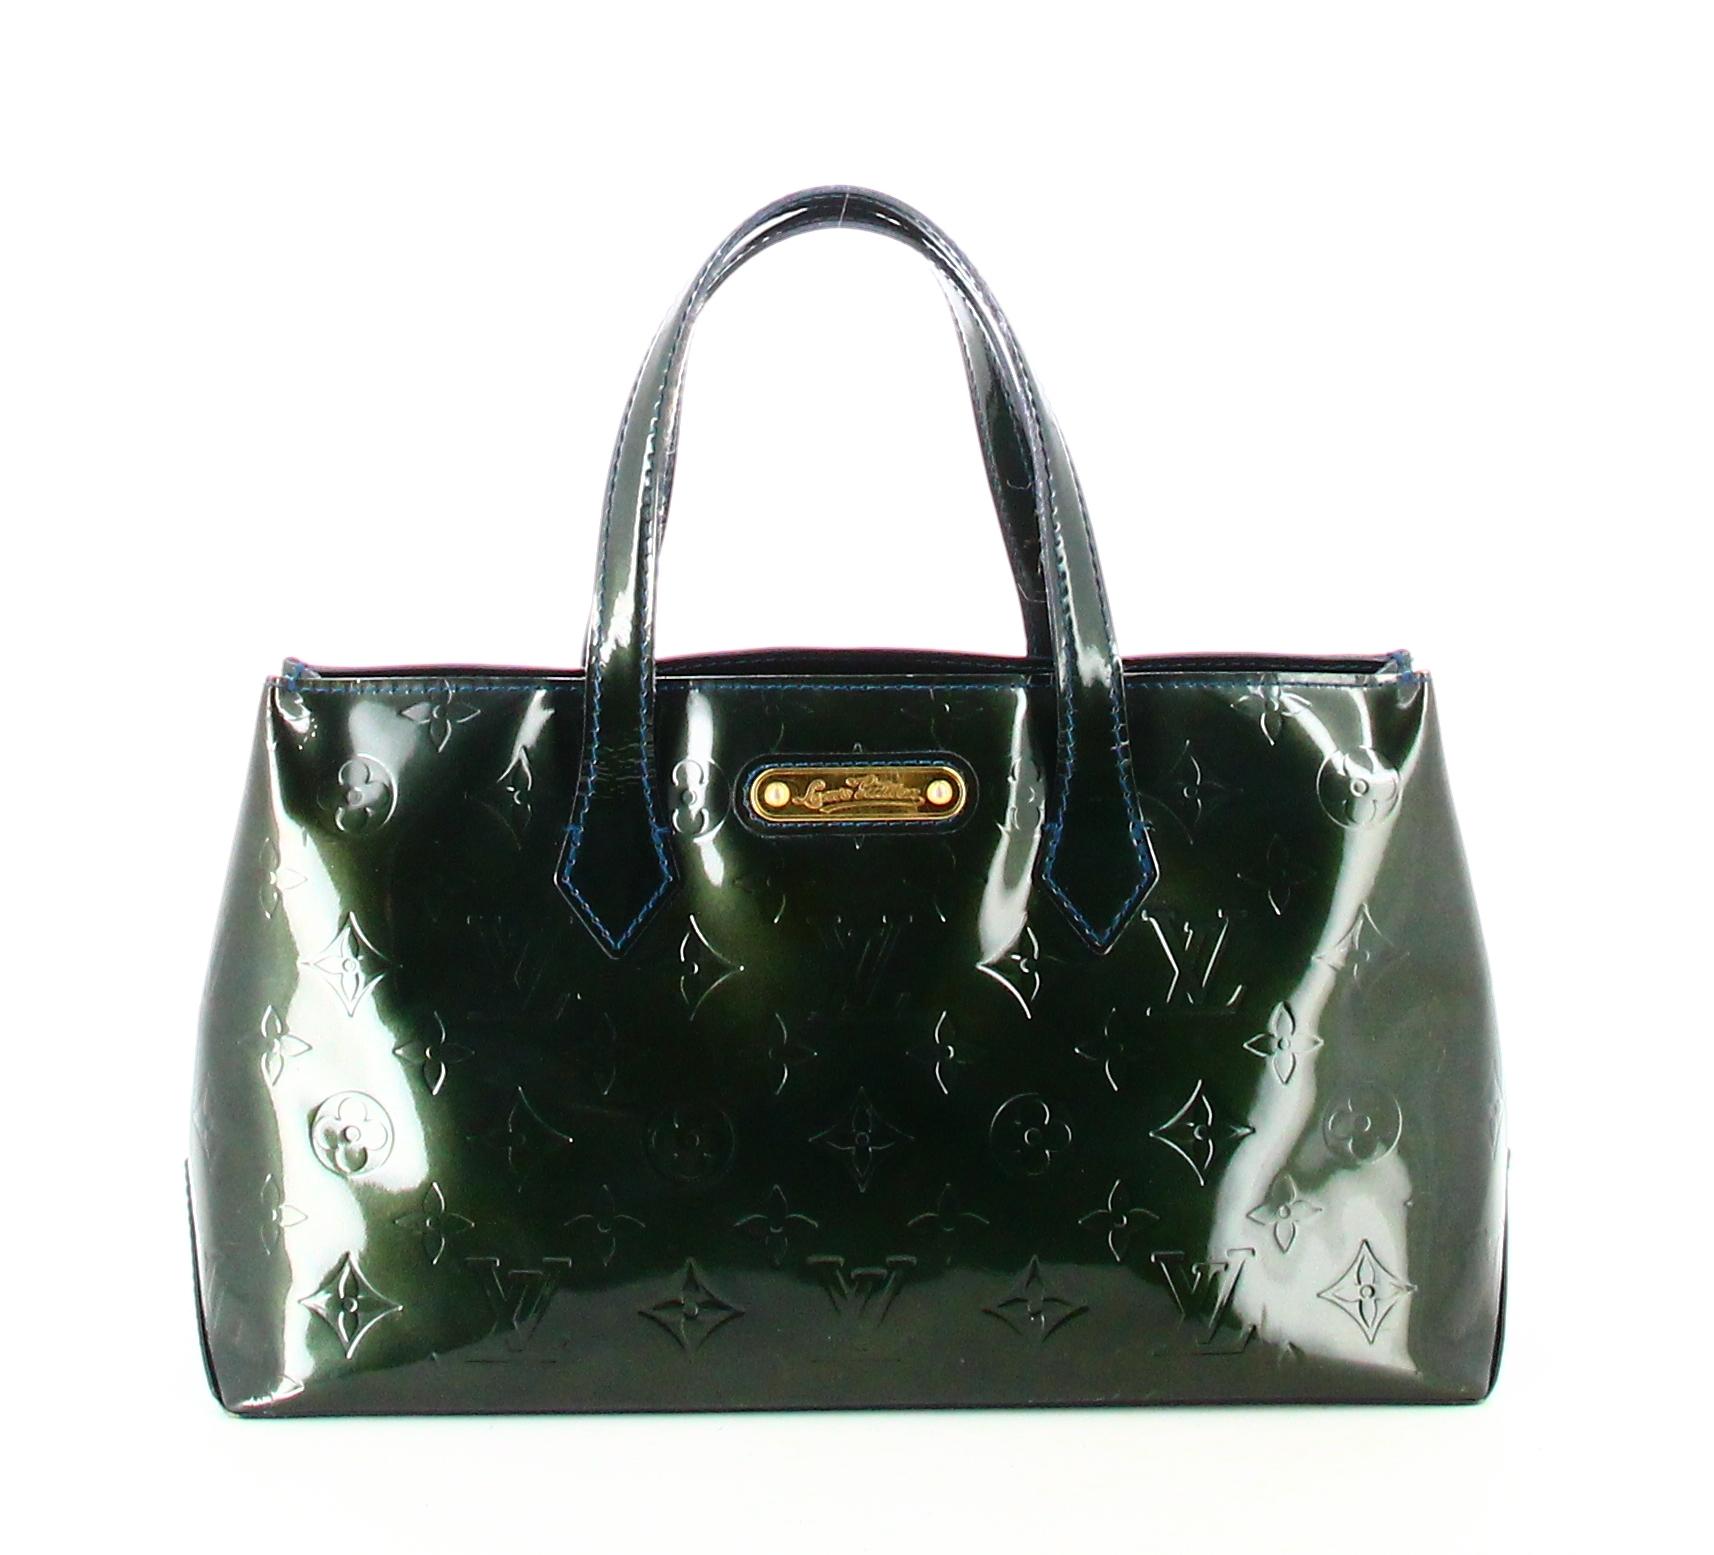 2009 Louis Vuitton Leather Handbag Vernis Vert Monogram 

- Very good condition. Shows very slight signs of wear over time. 
- Louis Vuitton Bag 
- Green patent leather 
- Monogram 
- Two small handles 
- Inside: zipped pocket. green fabric